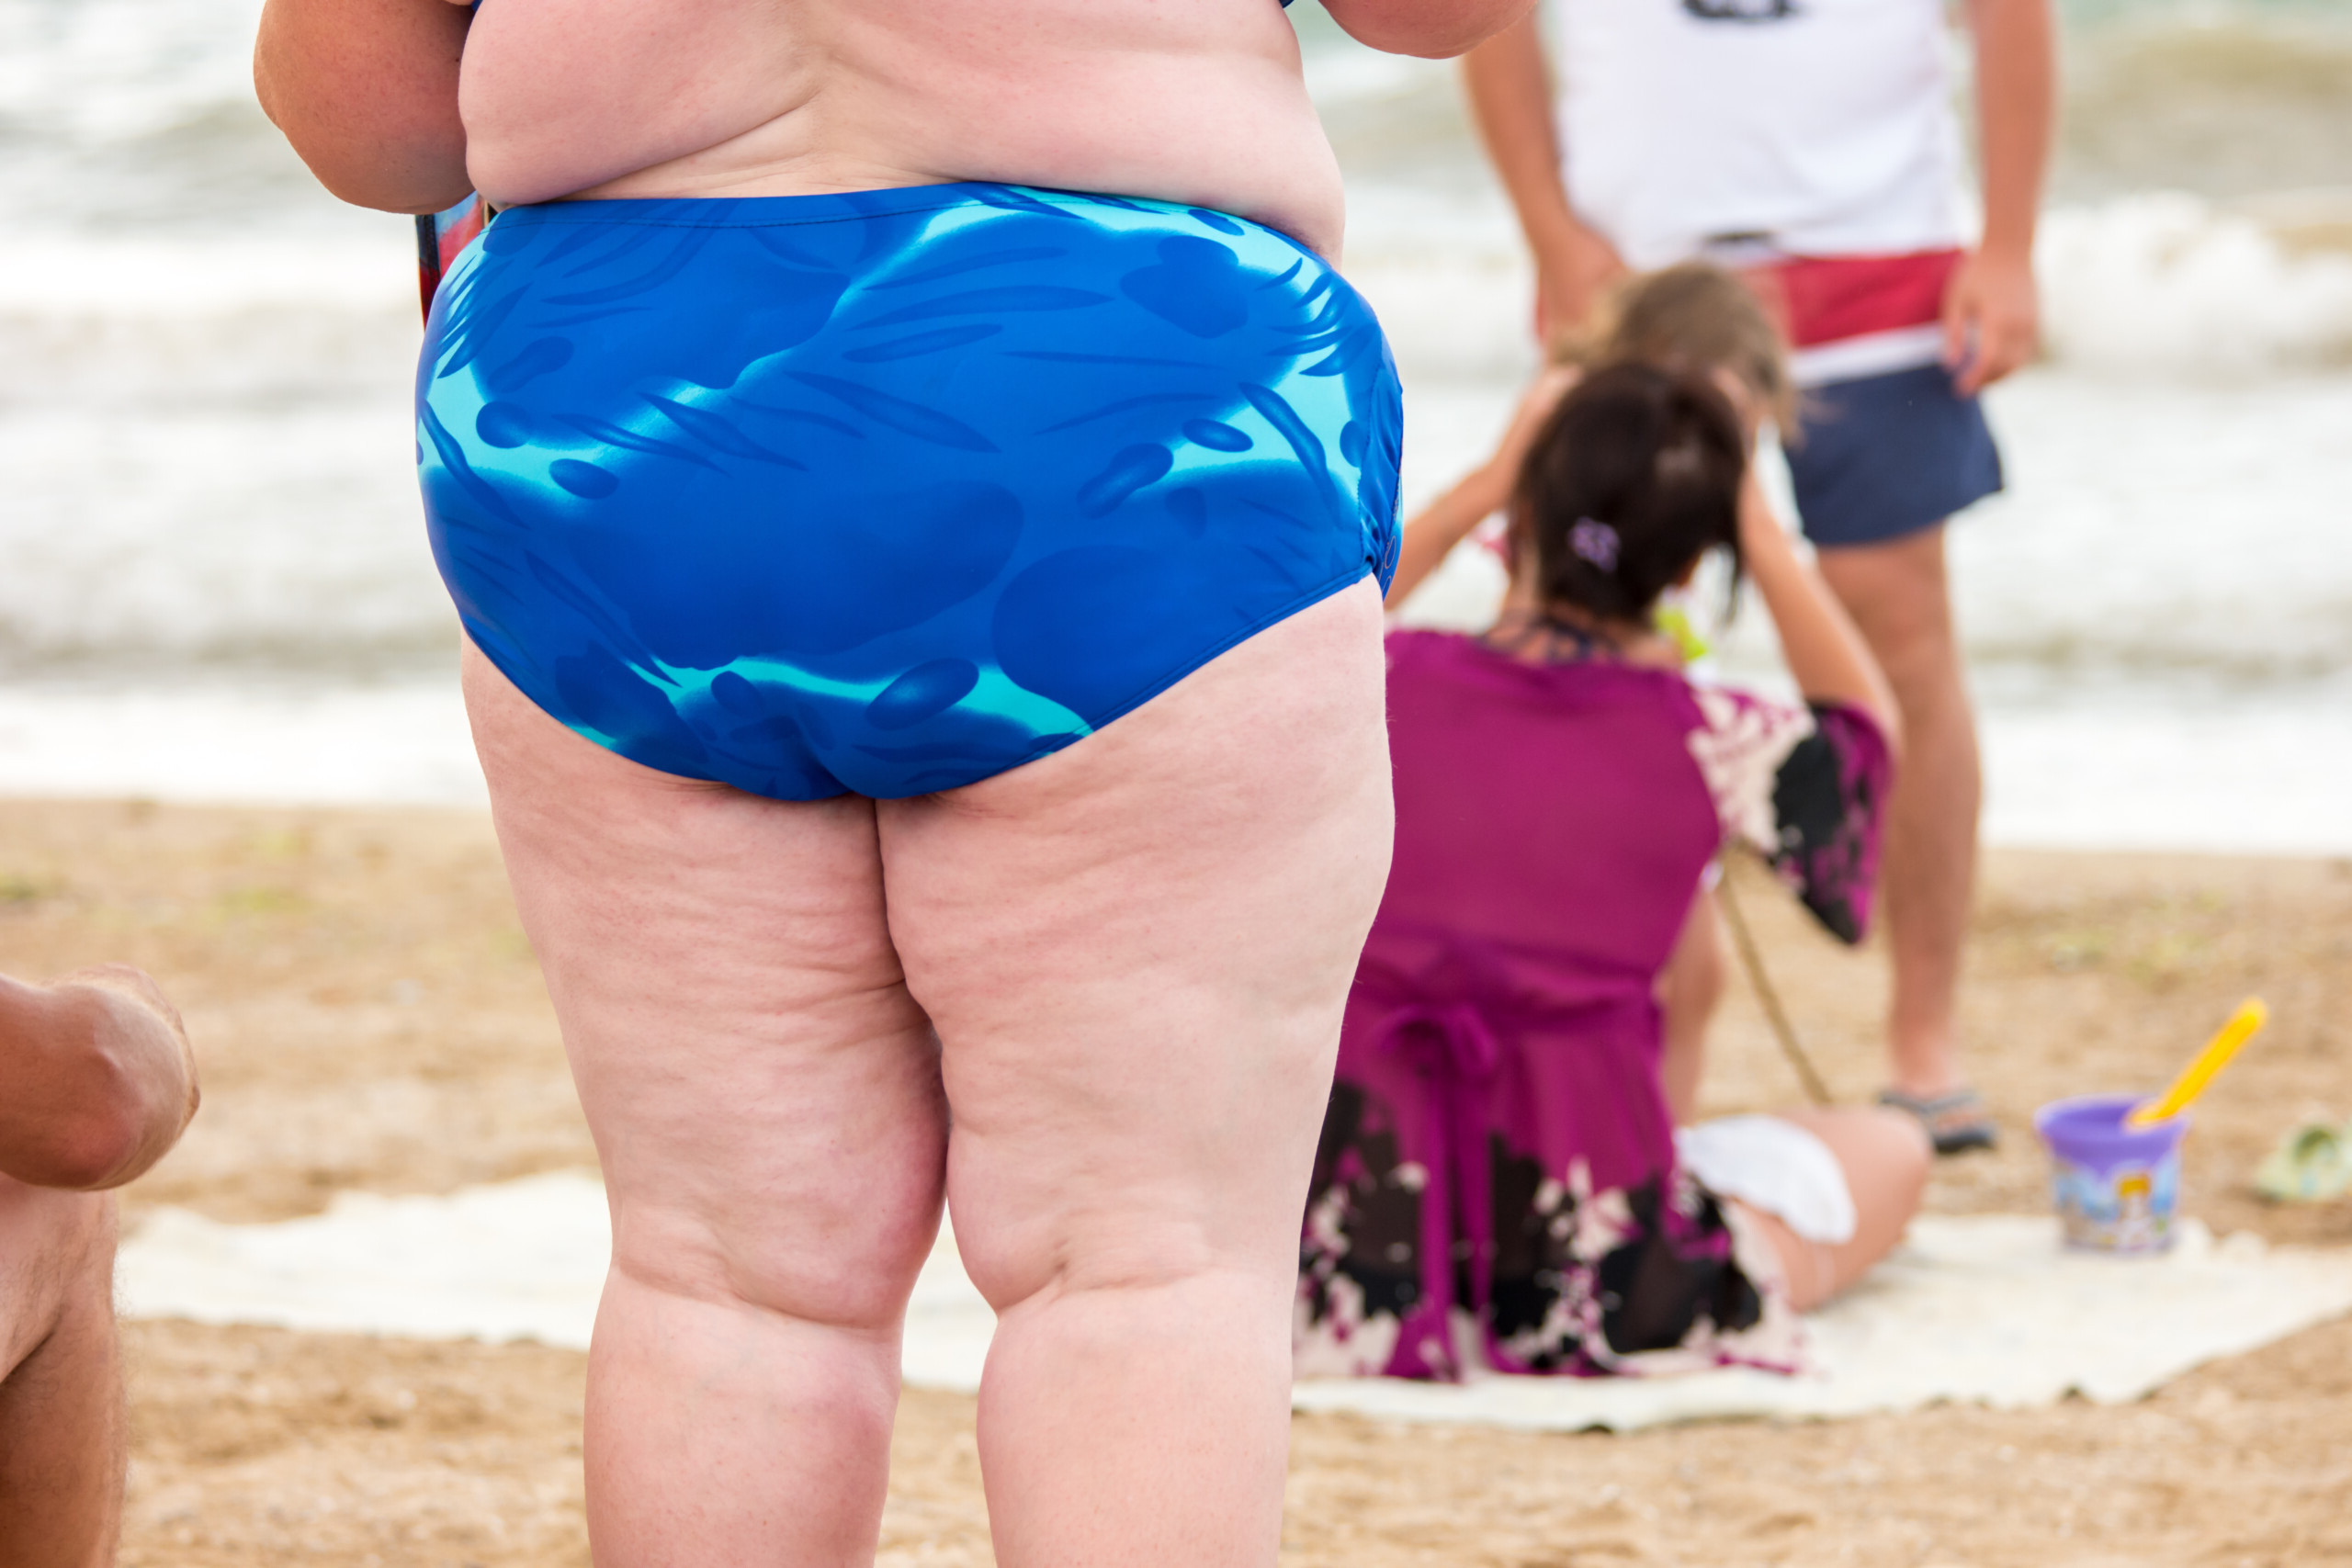 Why Courage Does Not Mean Wearing a Bikini if You're Fat